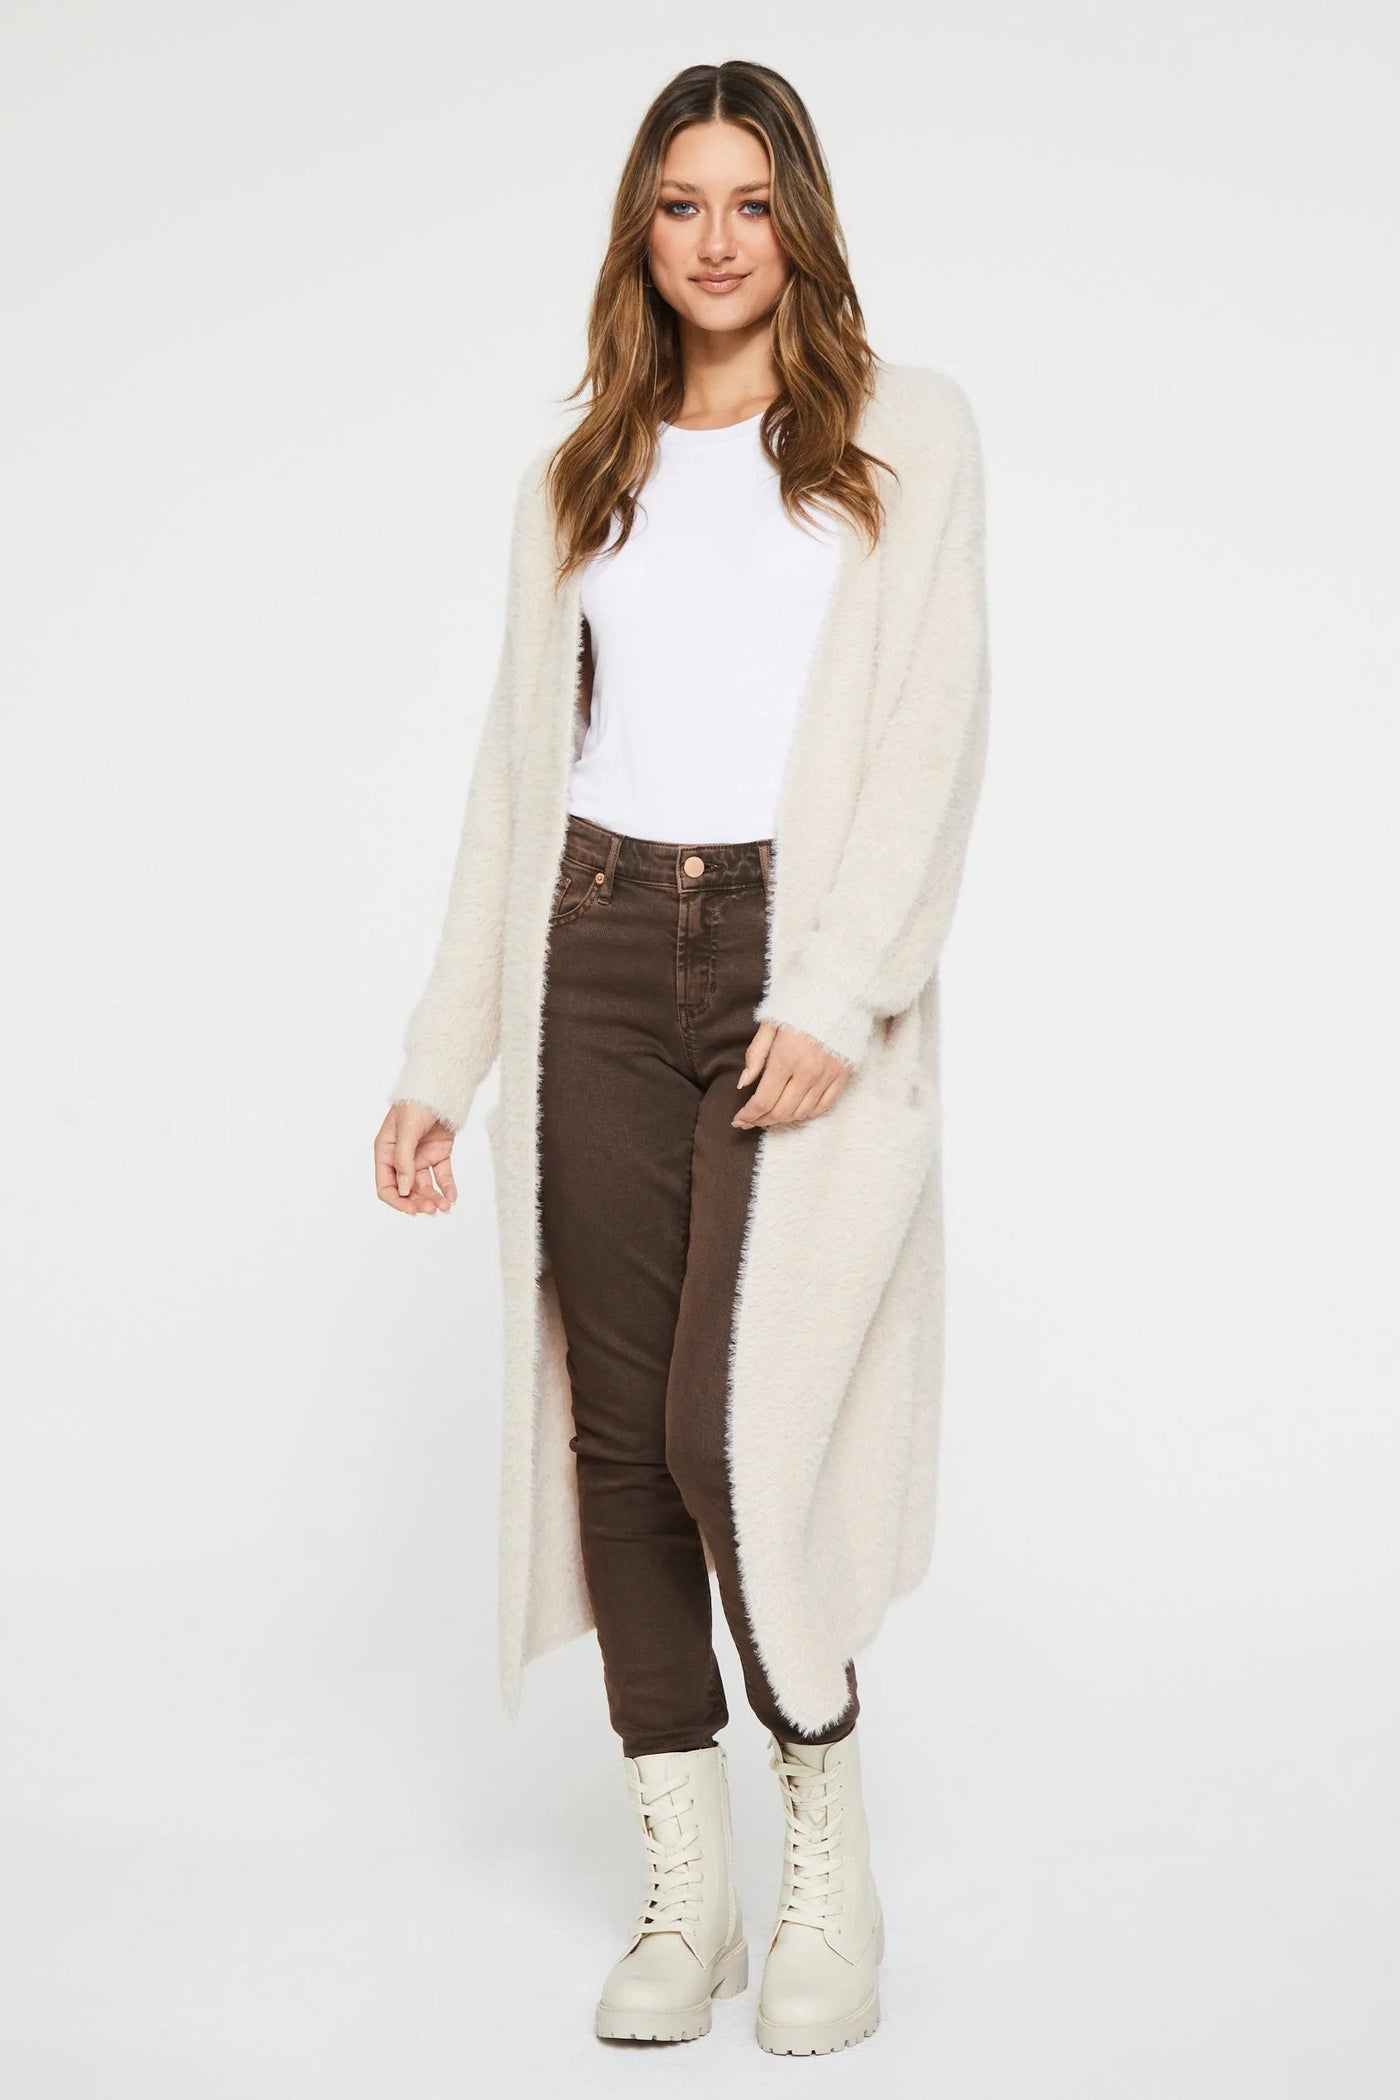 Another Love Electra Long Cardigan Front.